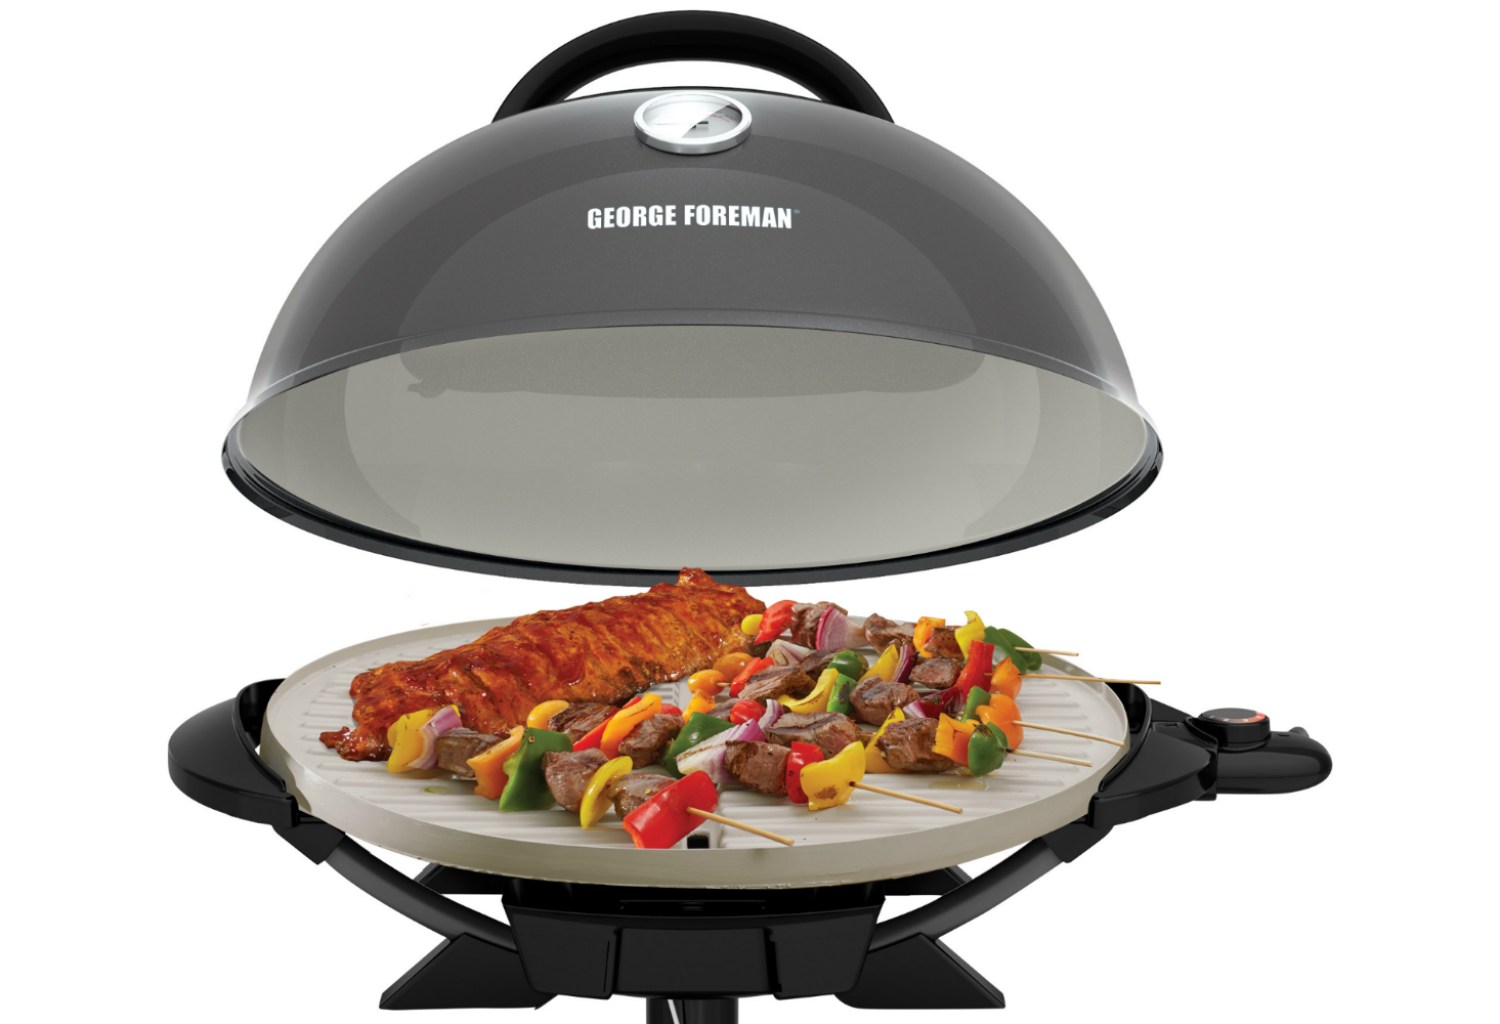 George Foreman 15+ Serving Indoor / Outdoor Electric Grill with